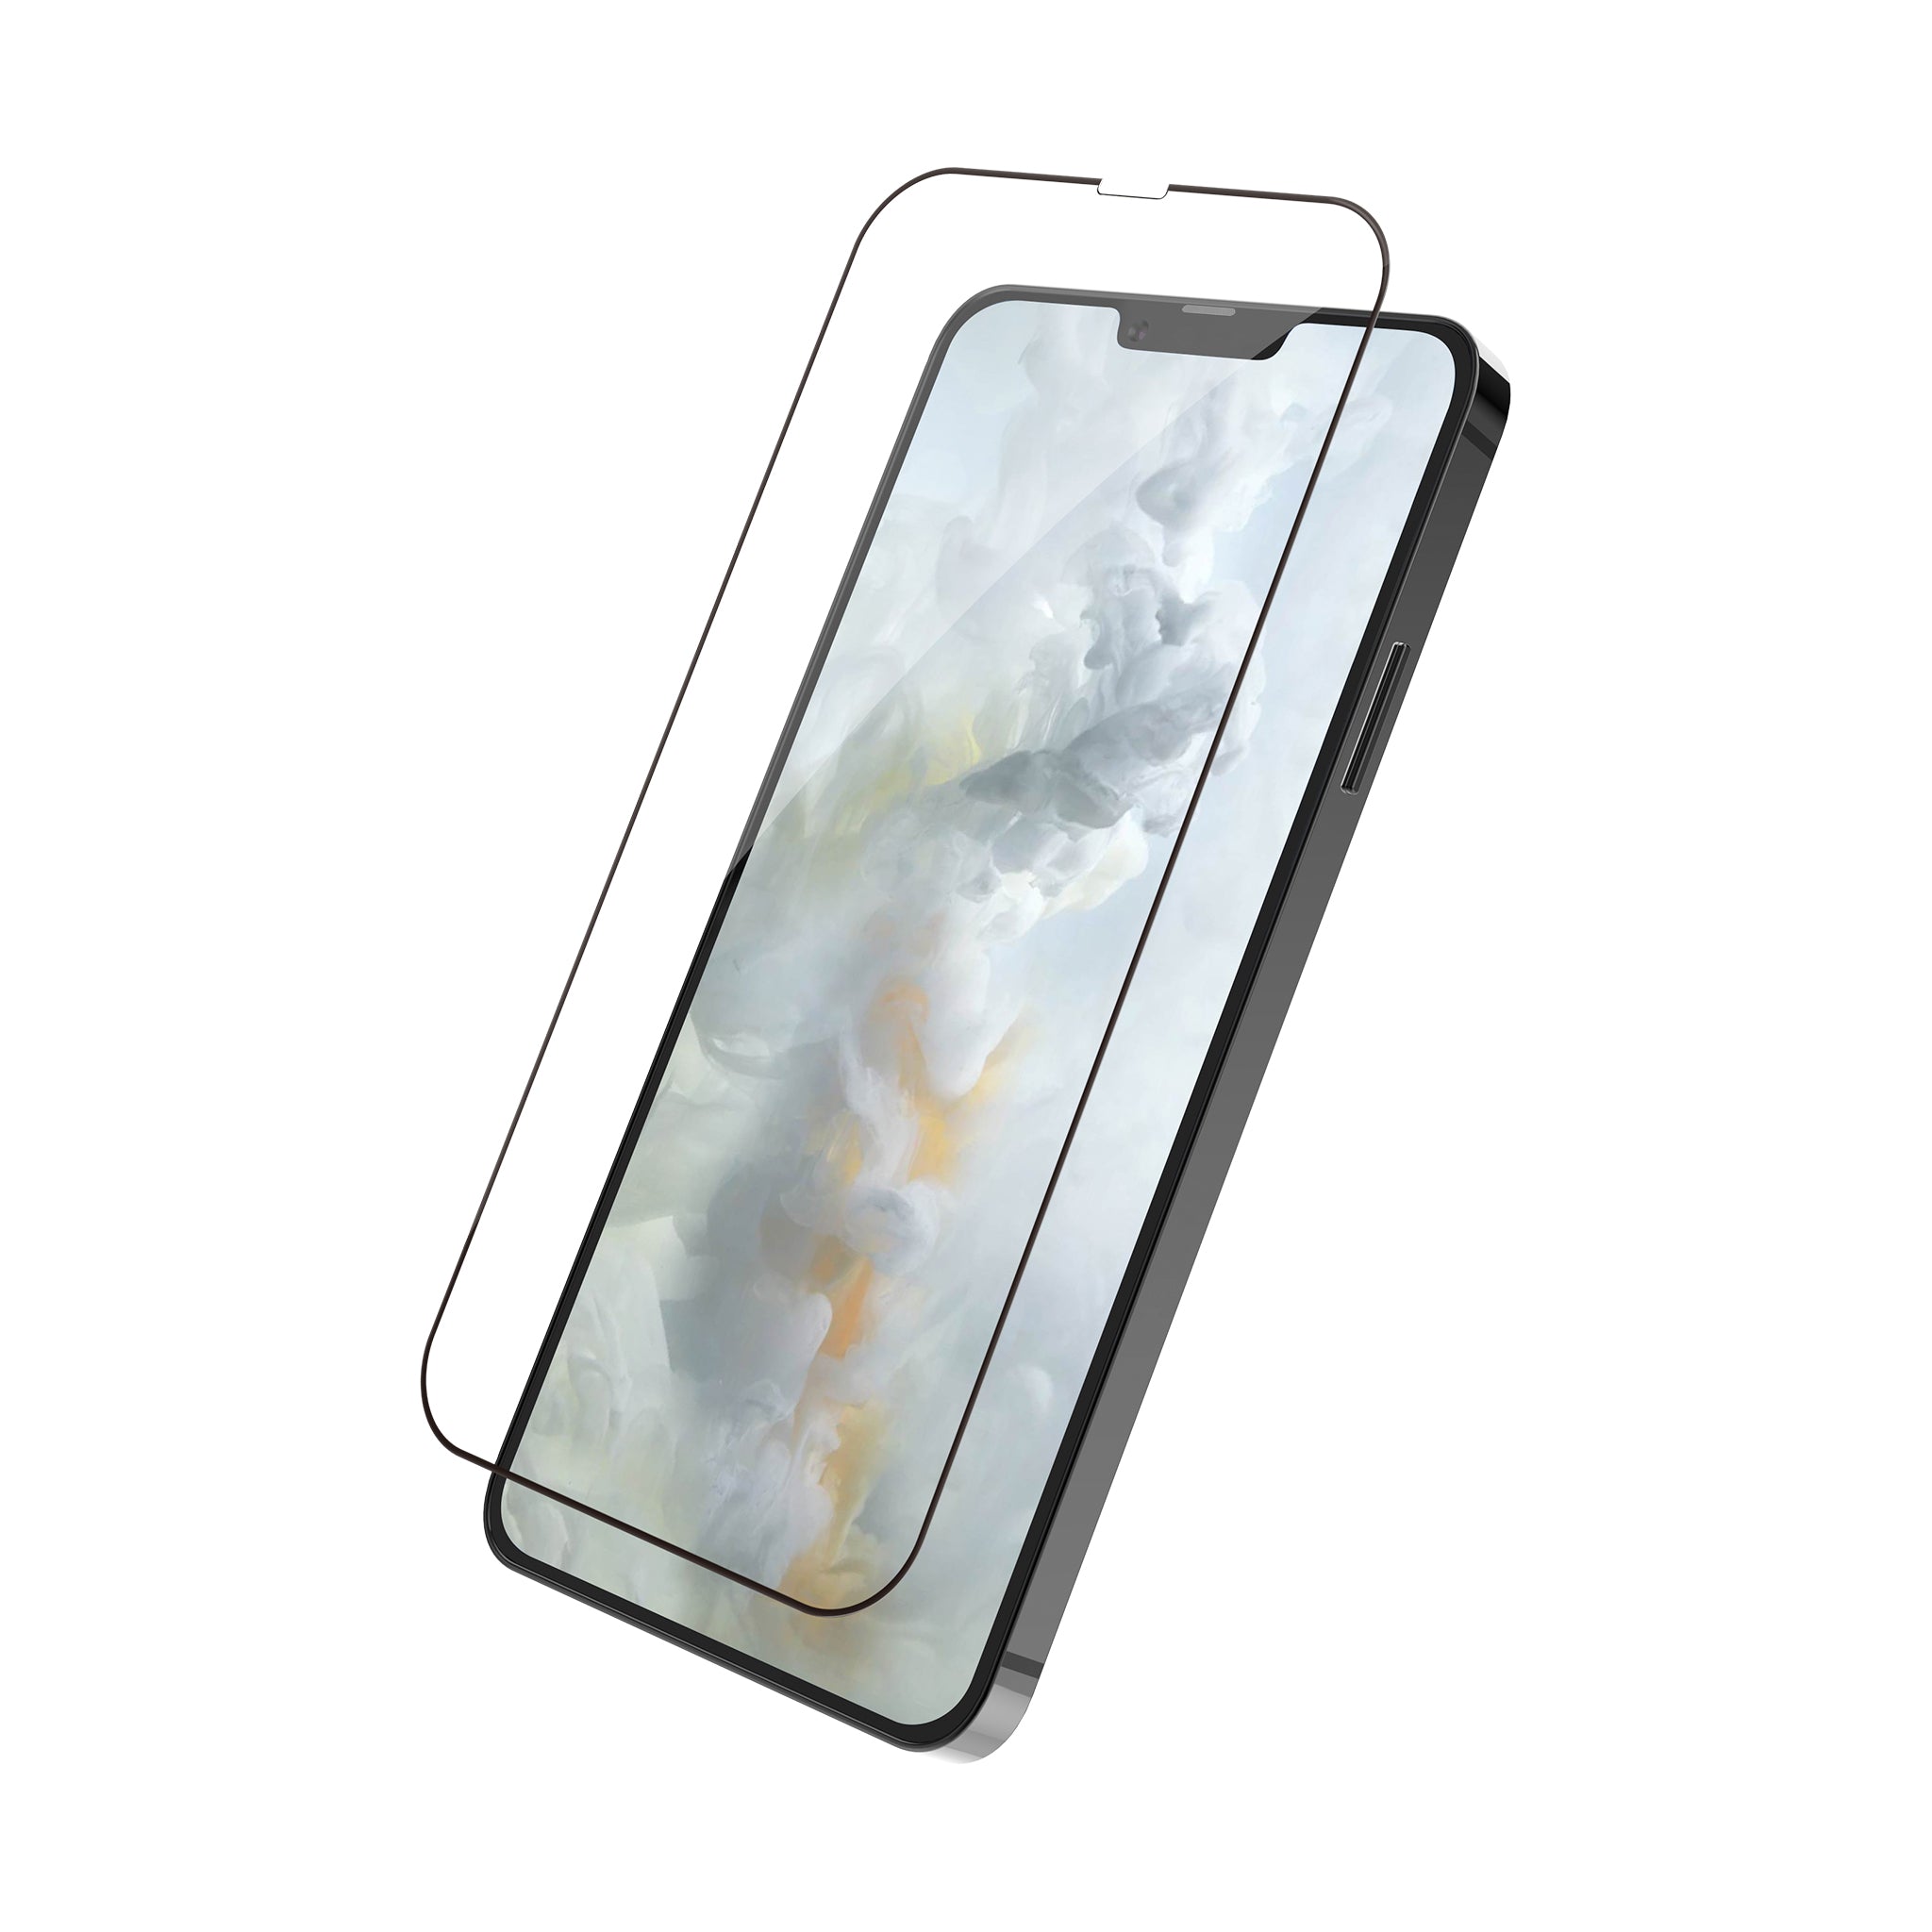 Preserver   Super Hardness Screen Protector for iPhone 13